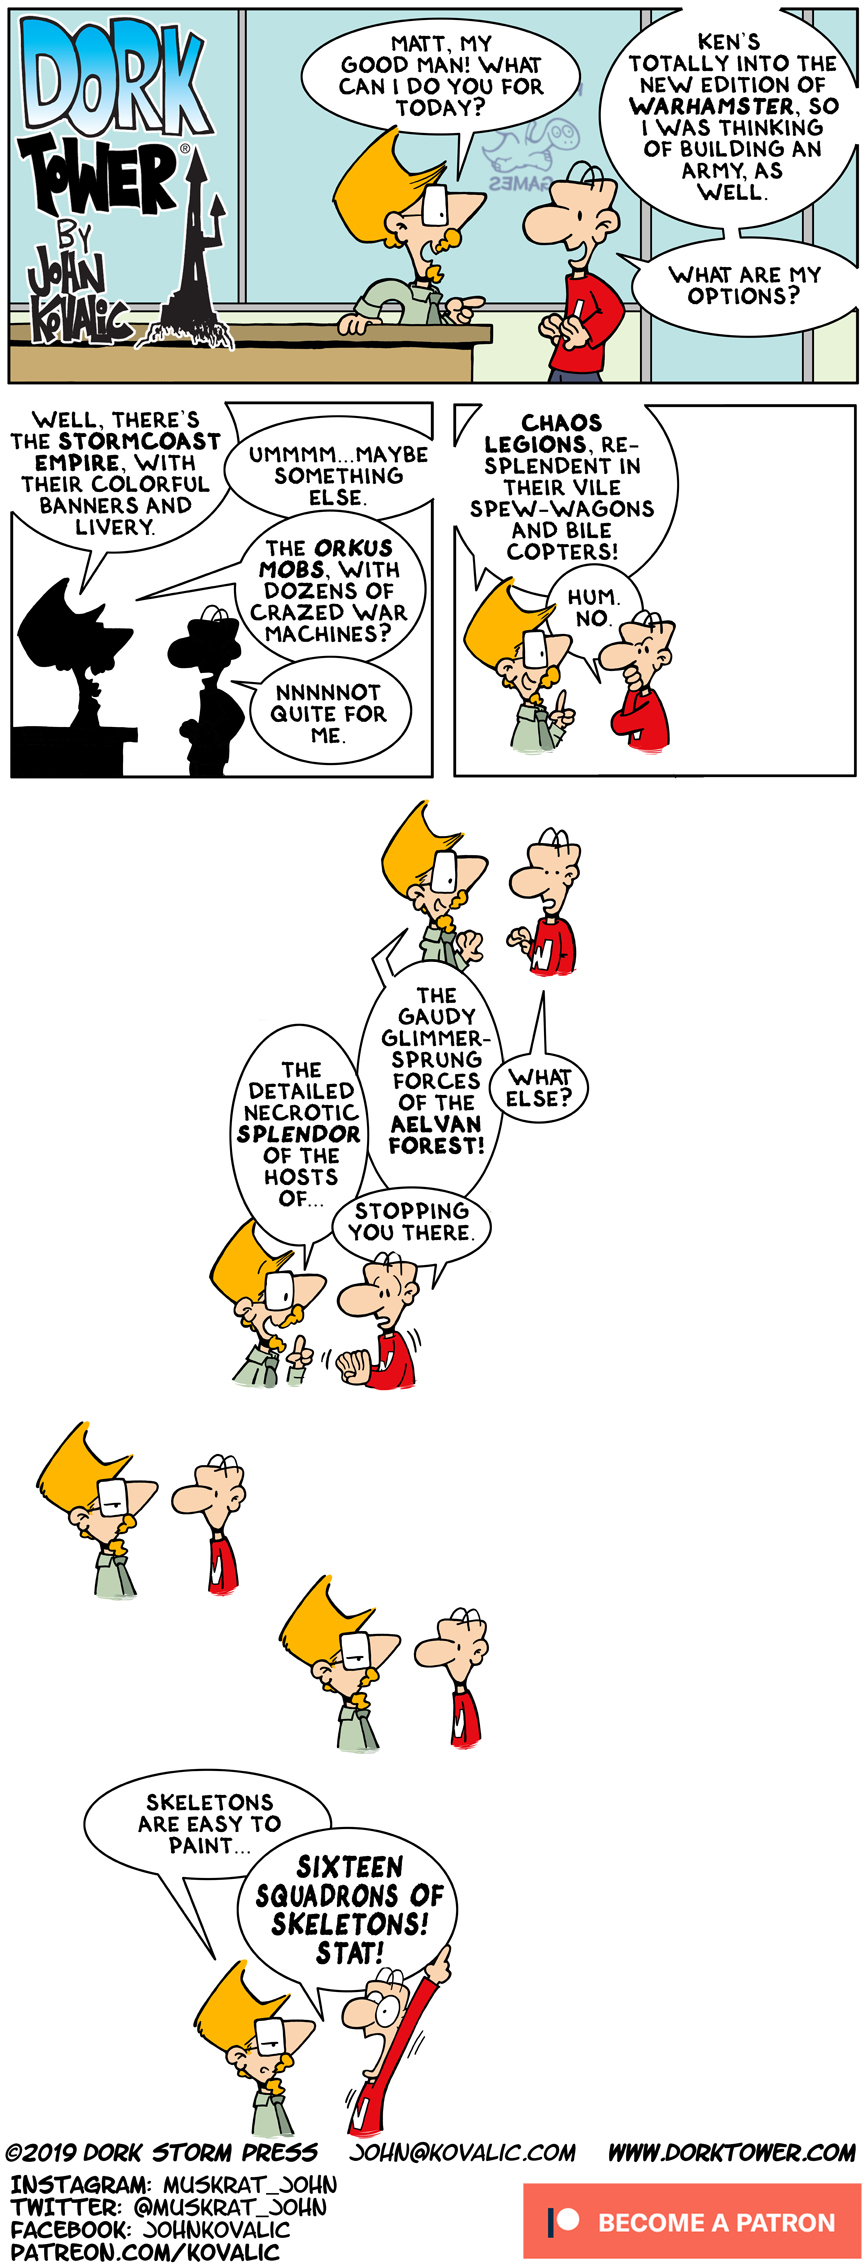 Dork Tower knows all!